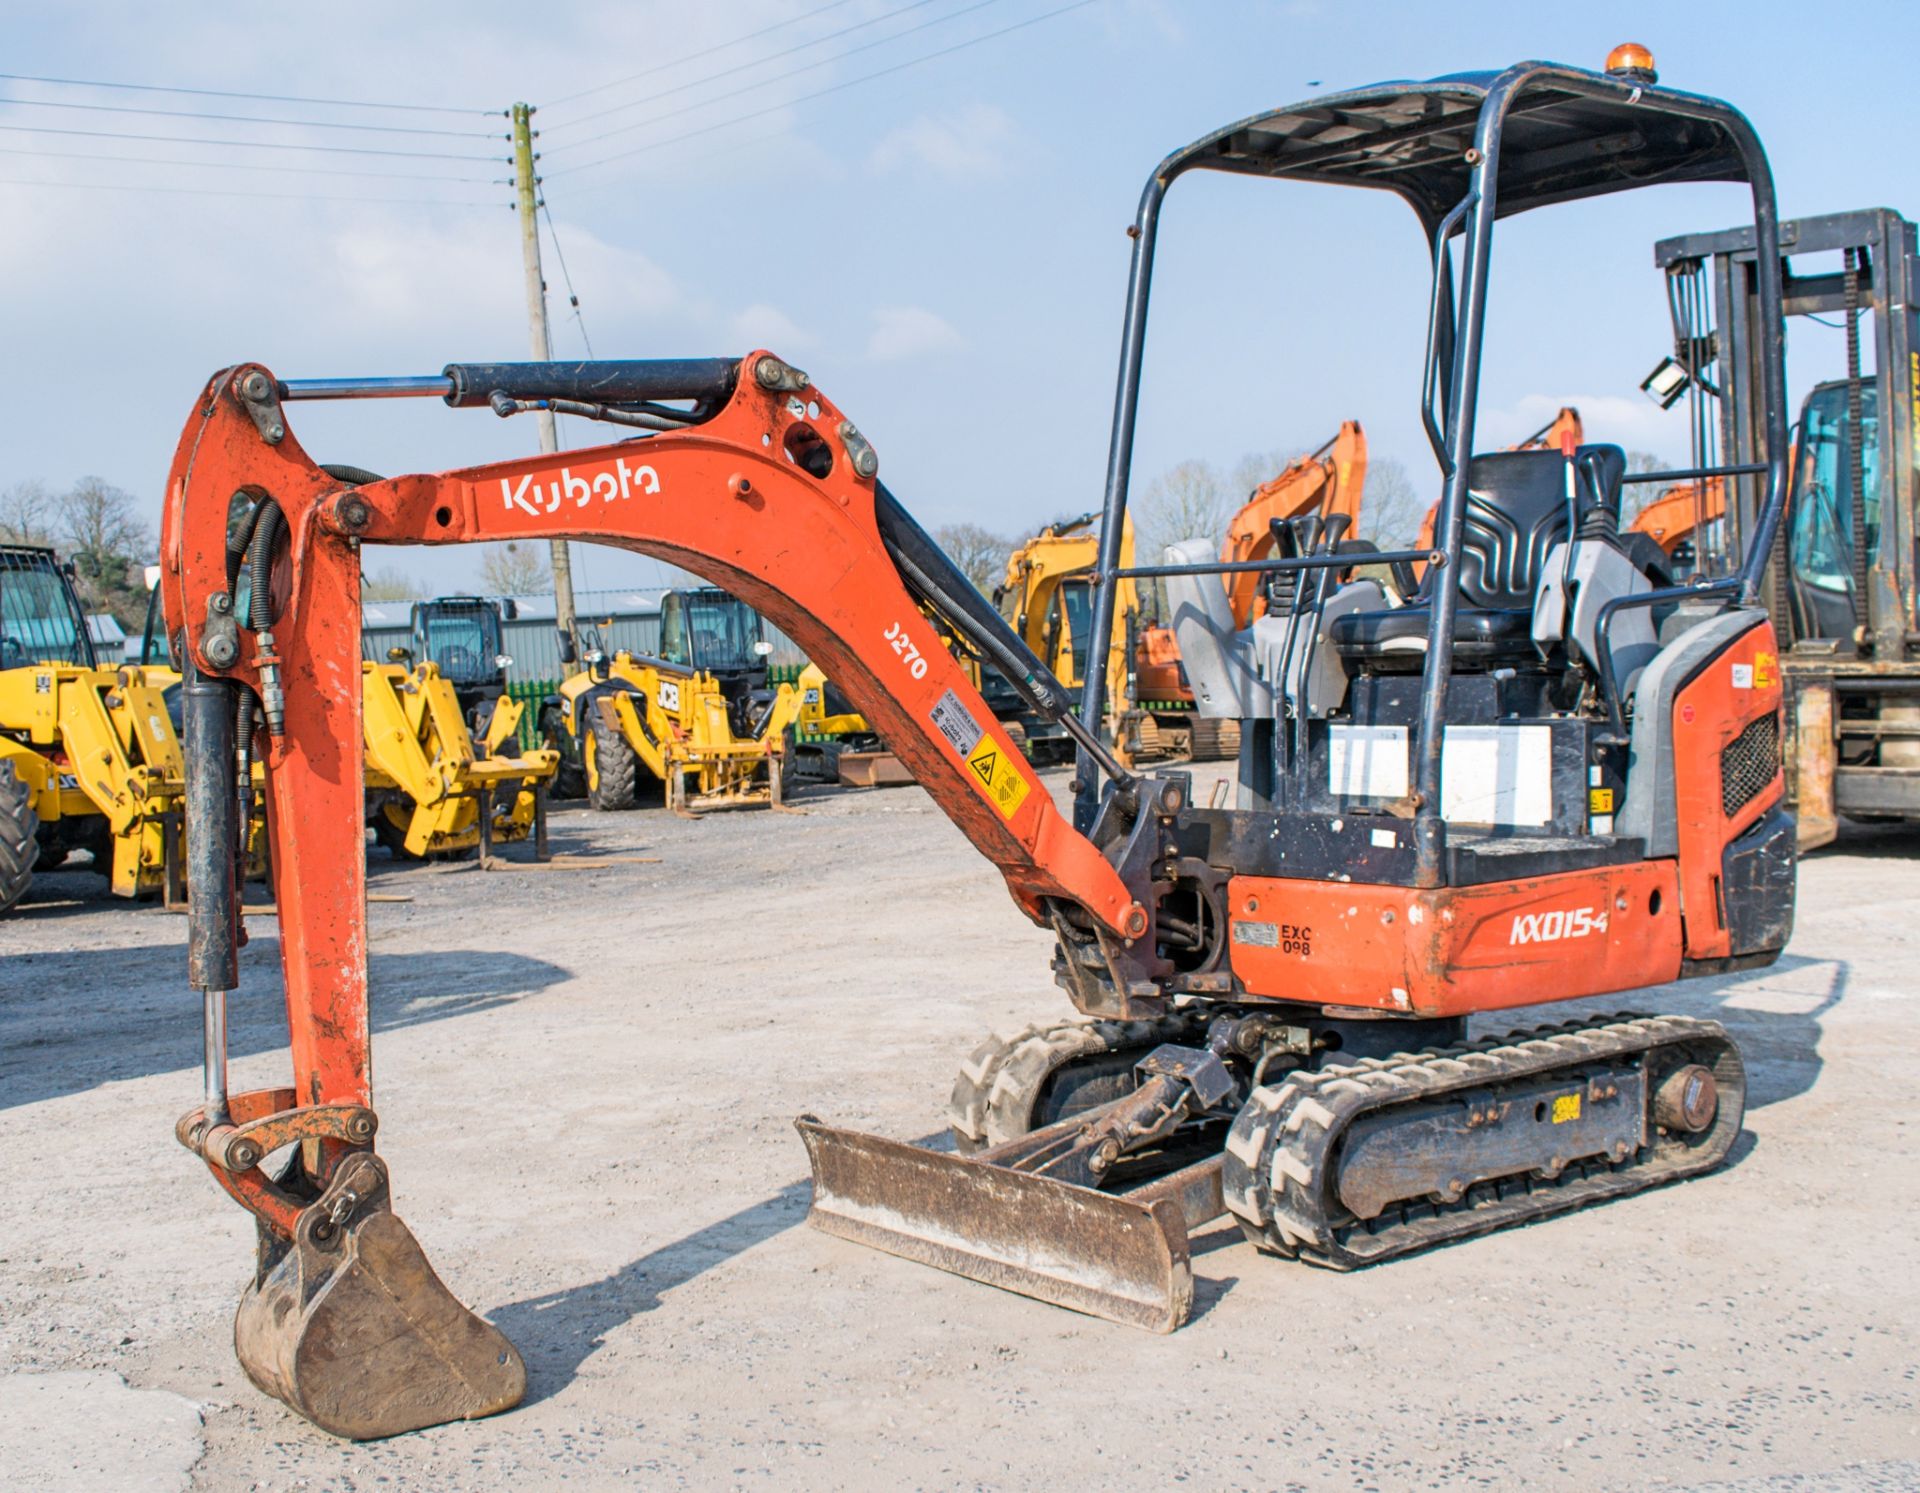 Kubota KX015.4 1.5 tonne rubber tracked excavator Year: 2011 S/N: 55648 Recorded Hours: 2722